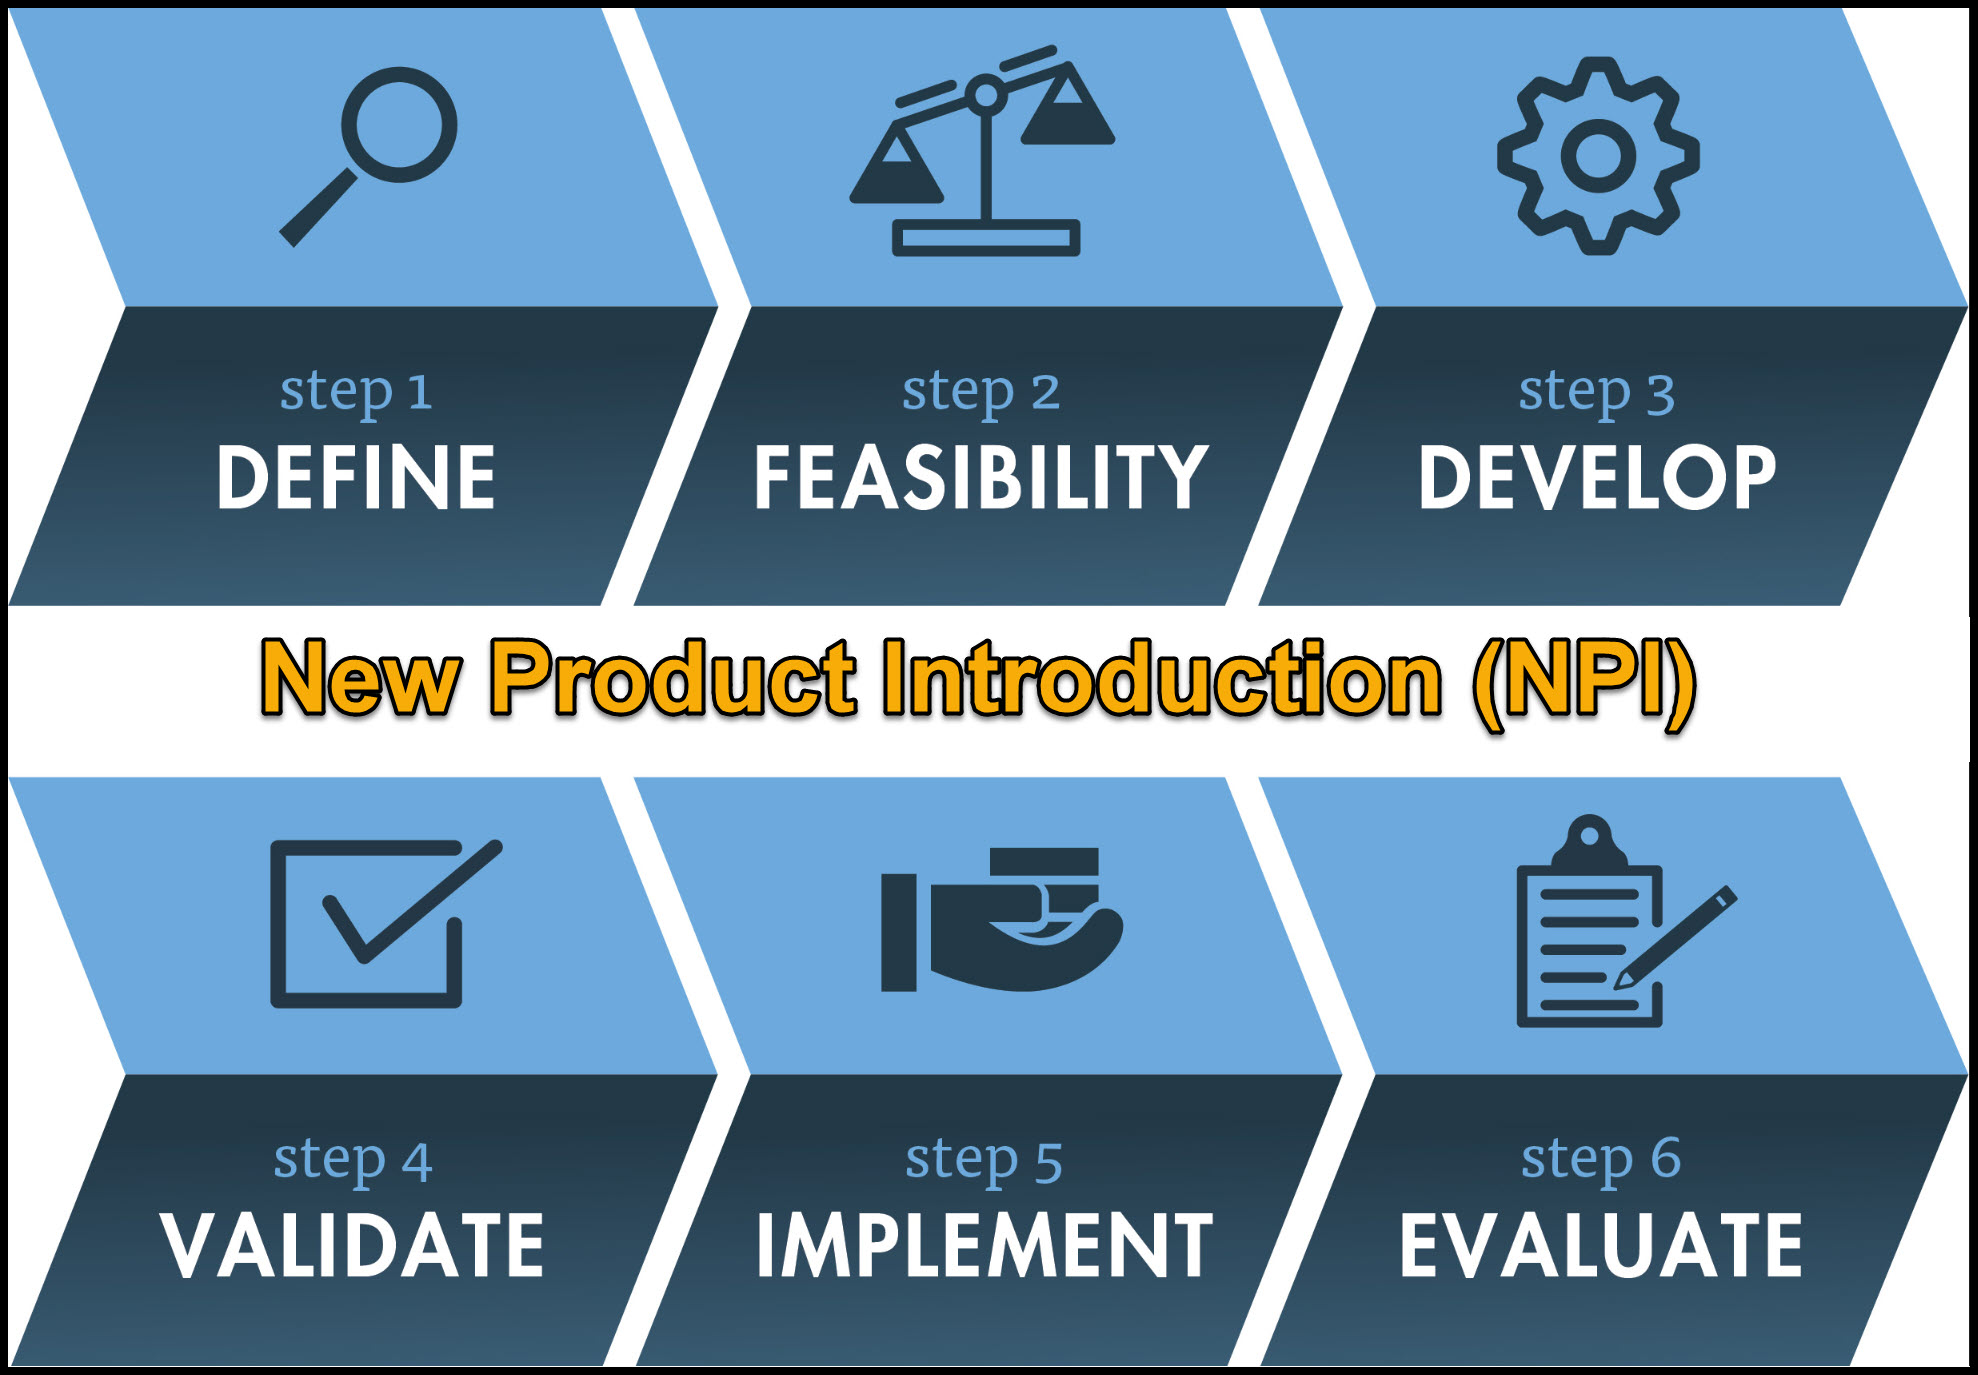 NPI (New Product Introduction) process